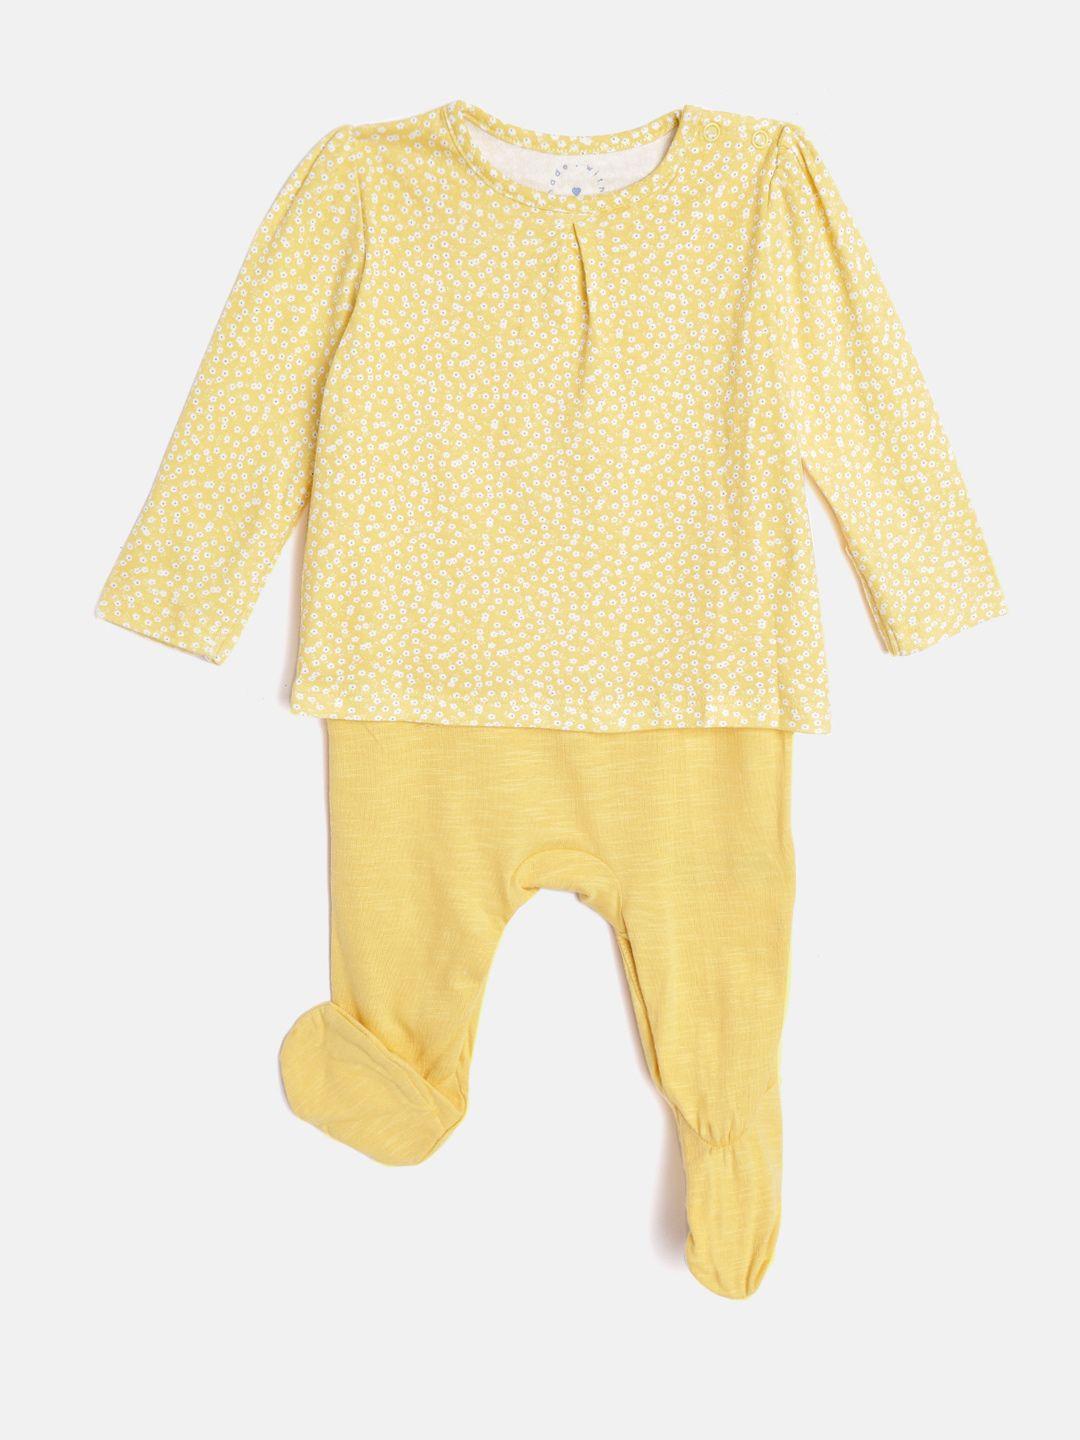 mothercare-infant-girls-yellow-&-white-floral-print-layered-pure-cotton-sleepsuit